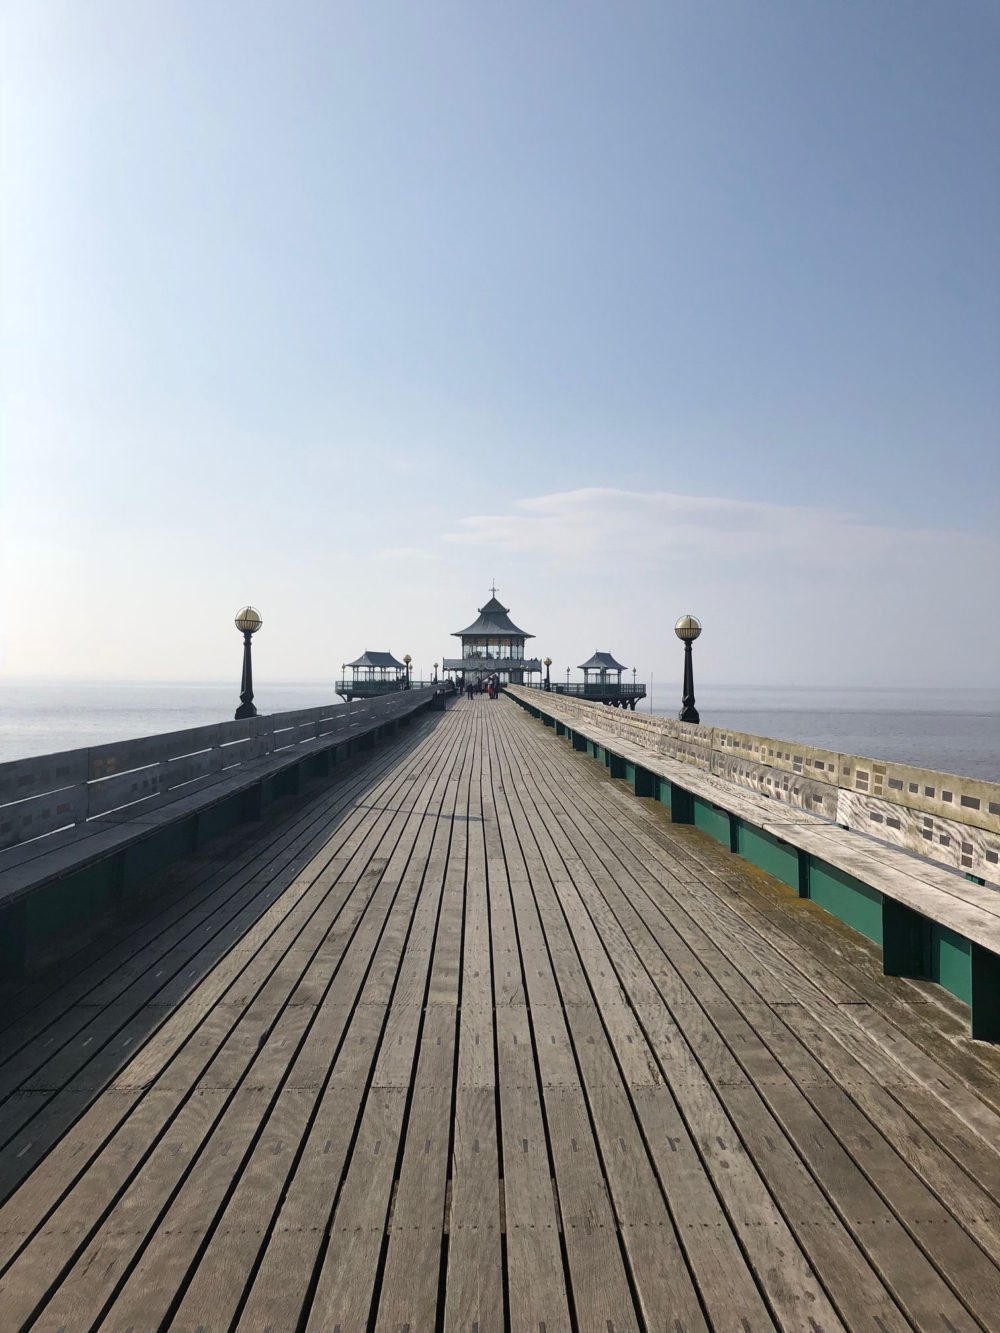 A wonderful afternoon at Clevedon – Bustle & Sew